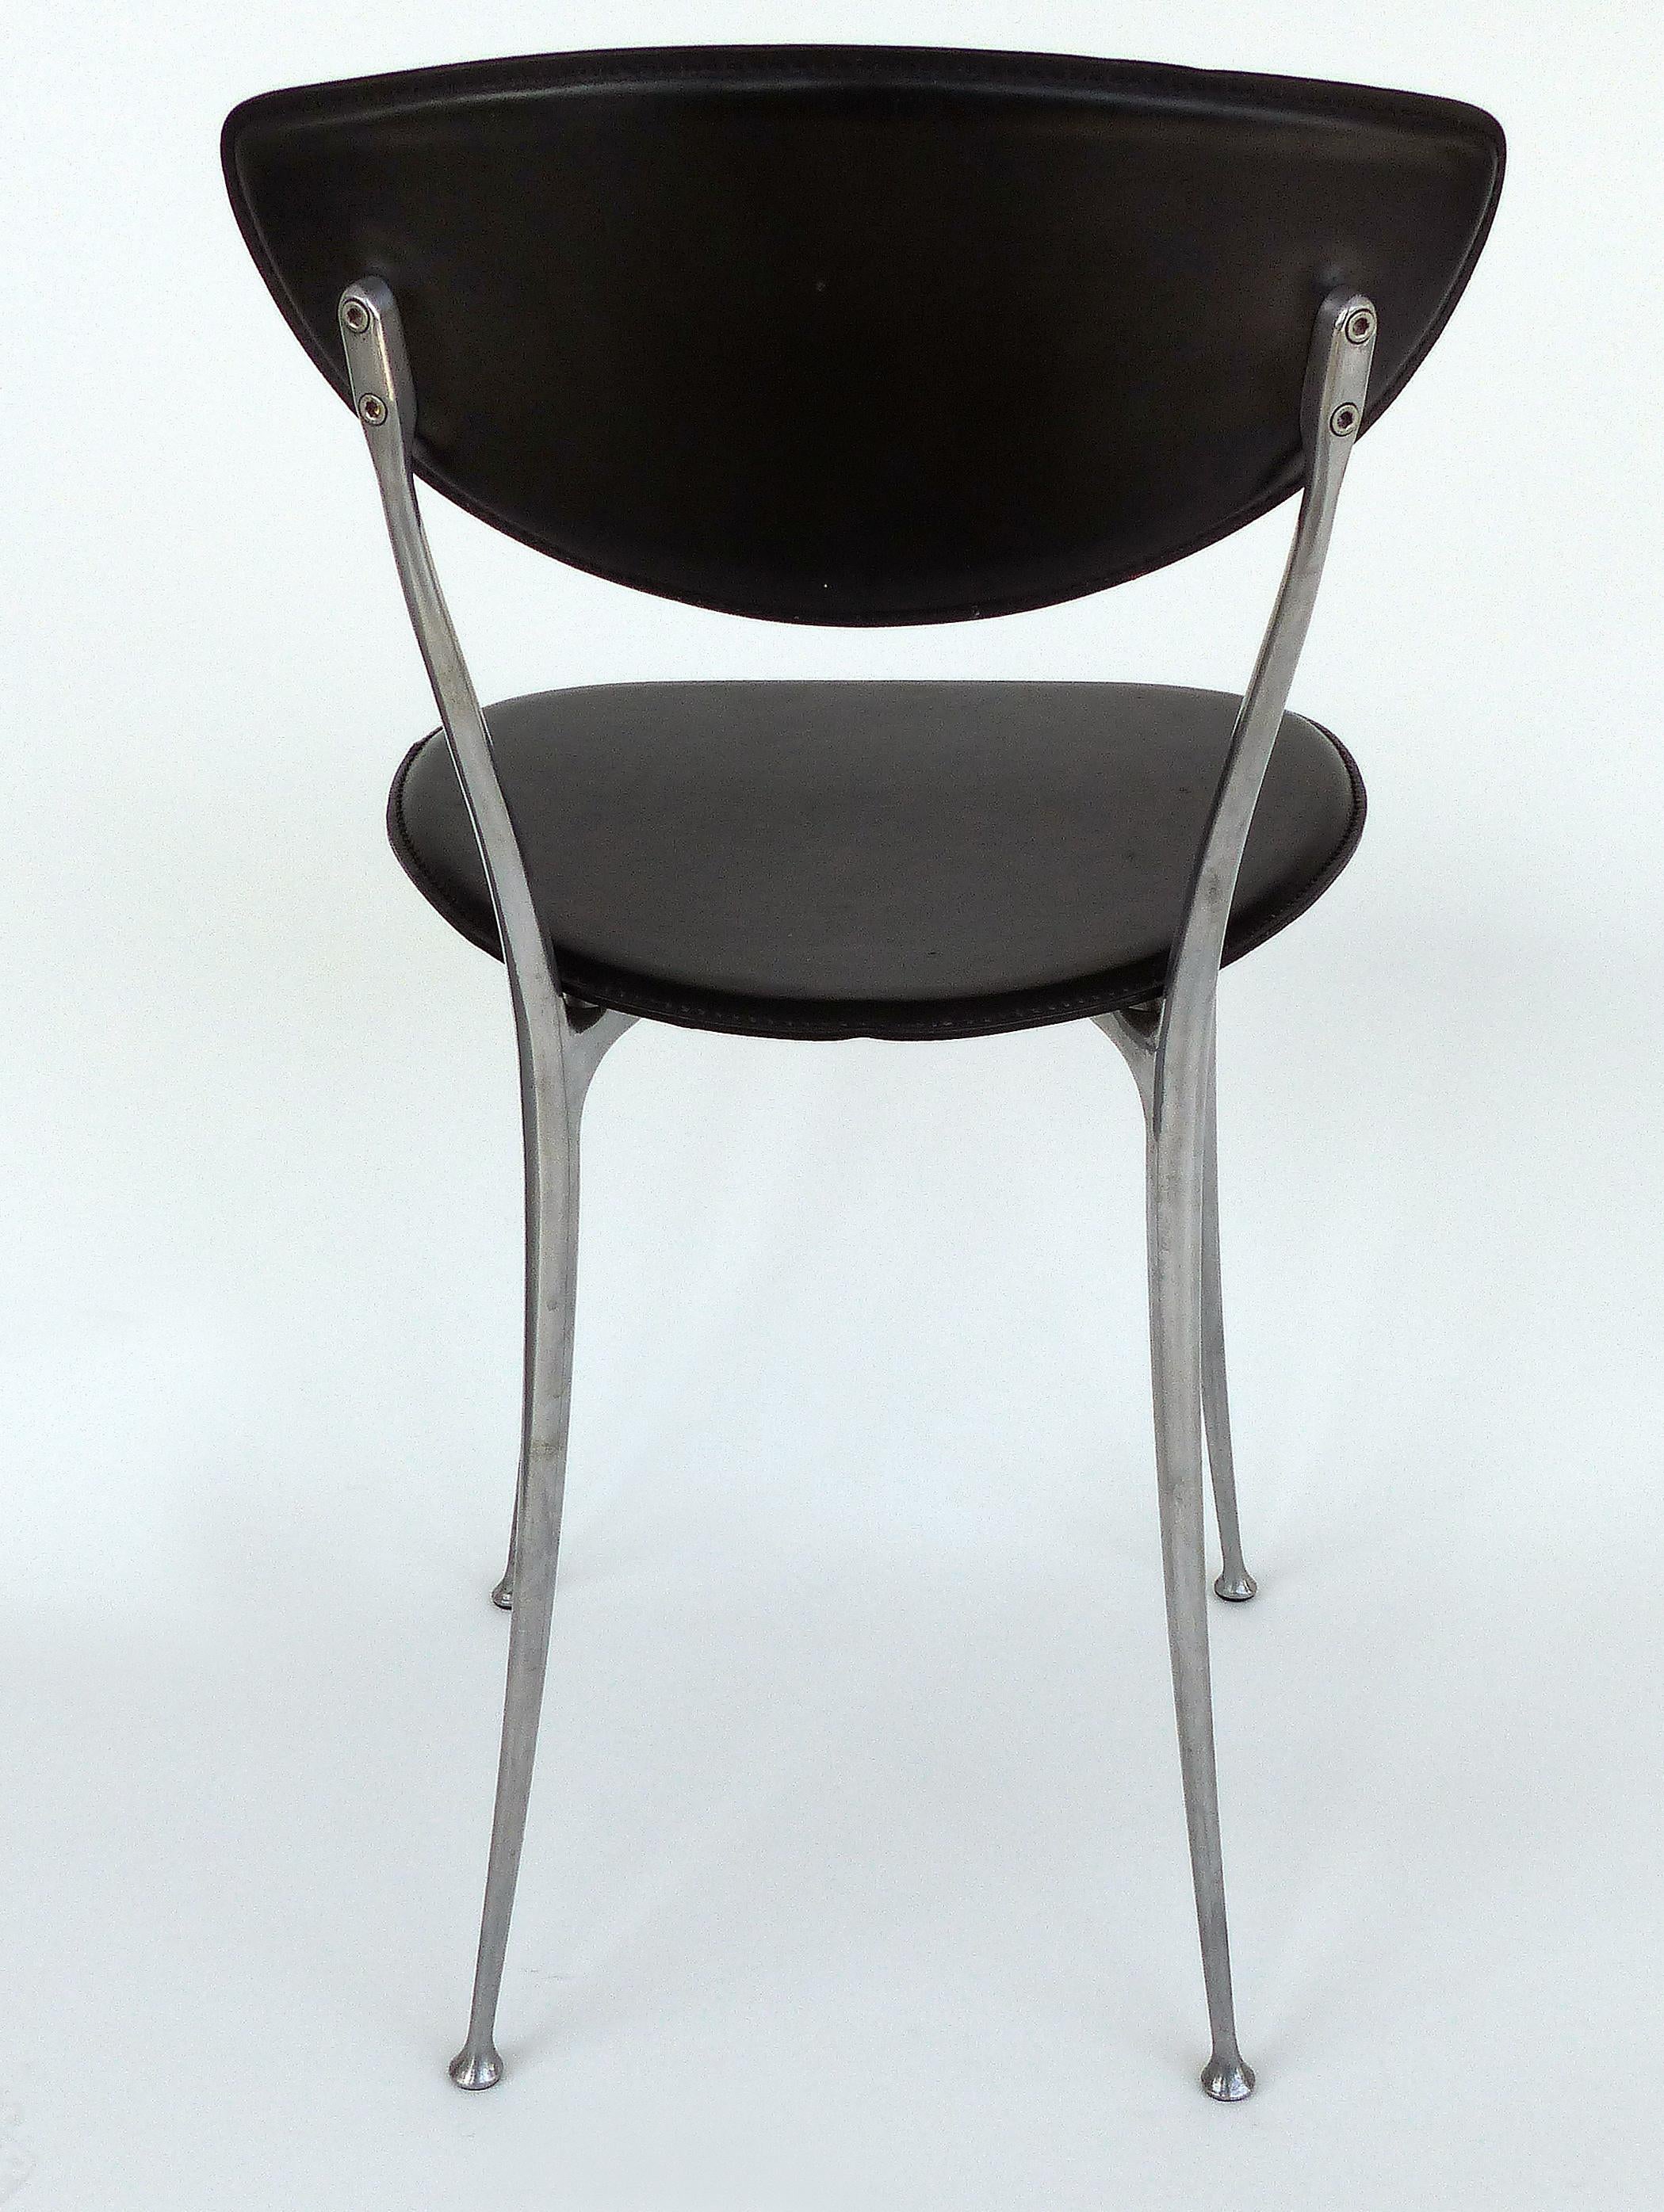 Set of 8 Arper Leather and Aluminum Dining Chairs, Italy In Good Condition For Sale In Miami, FL